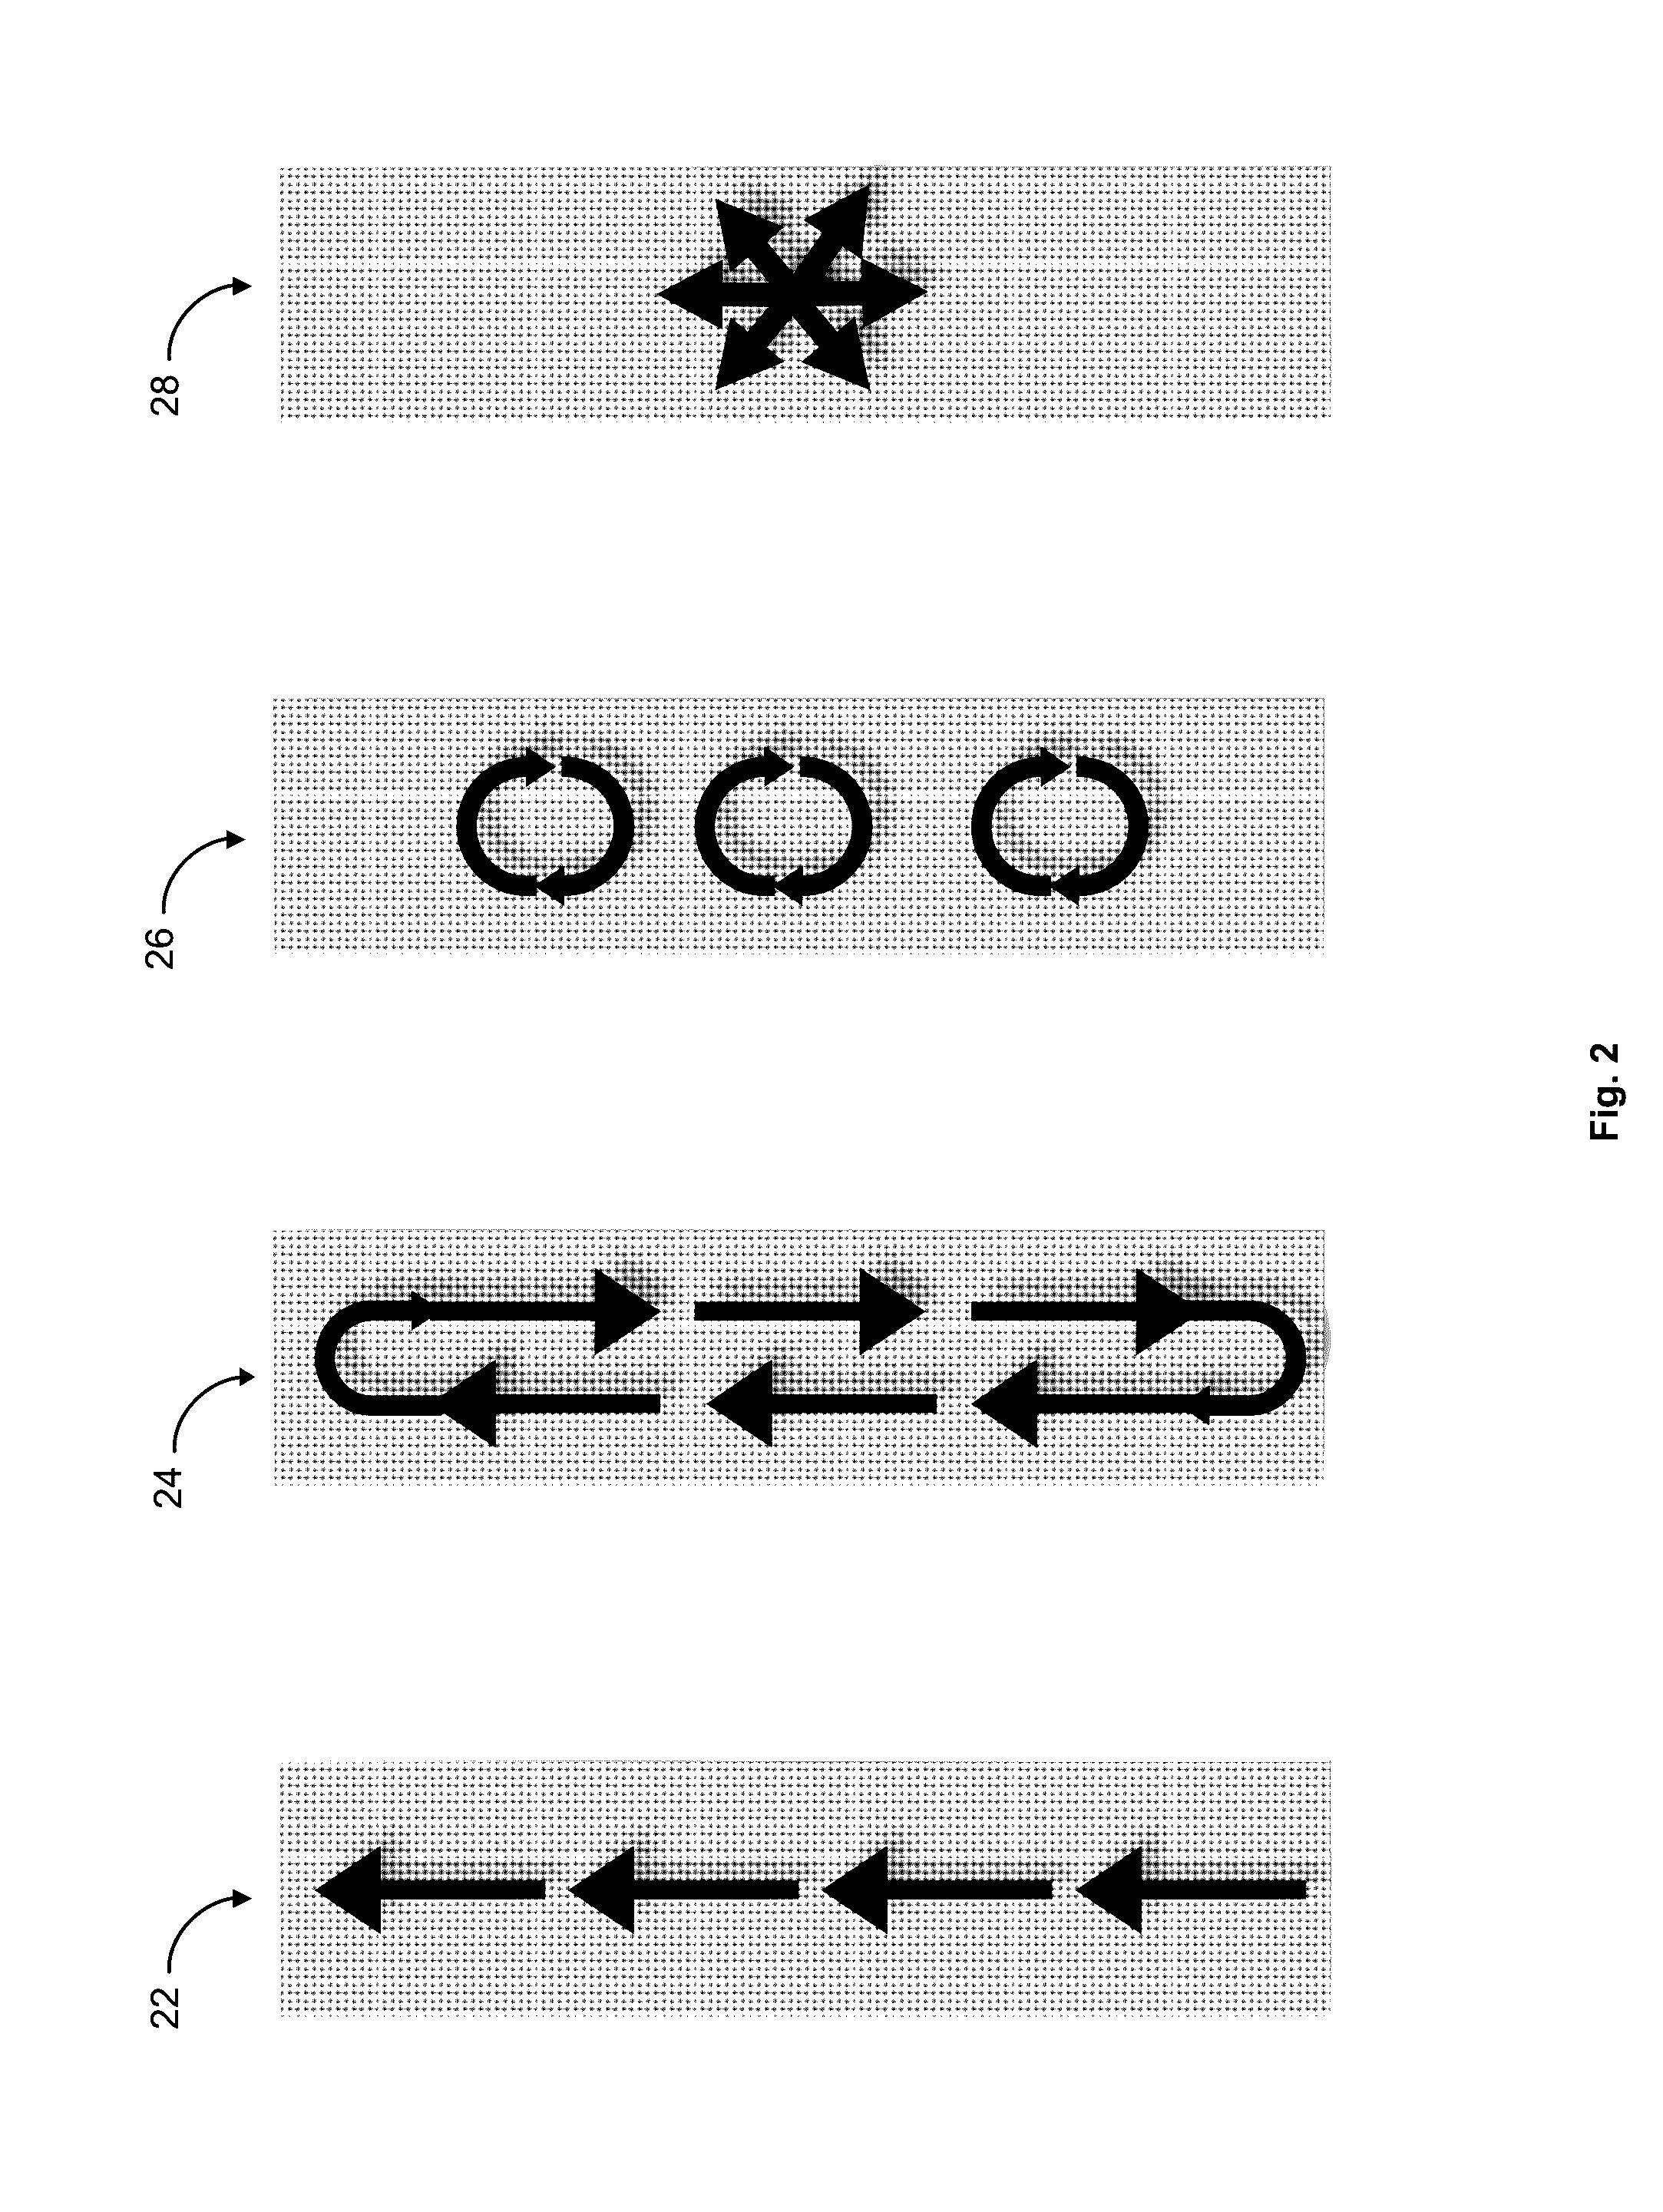 Apparatus for localized dermatological treatment